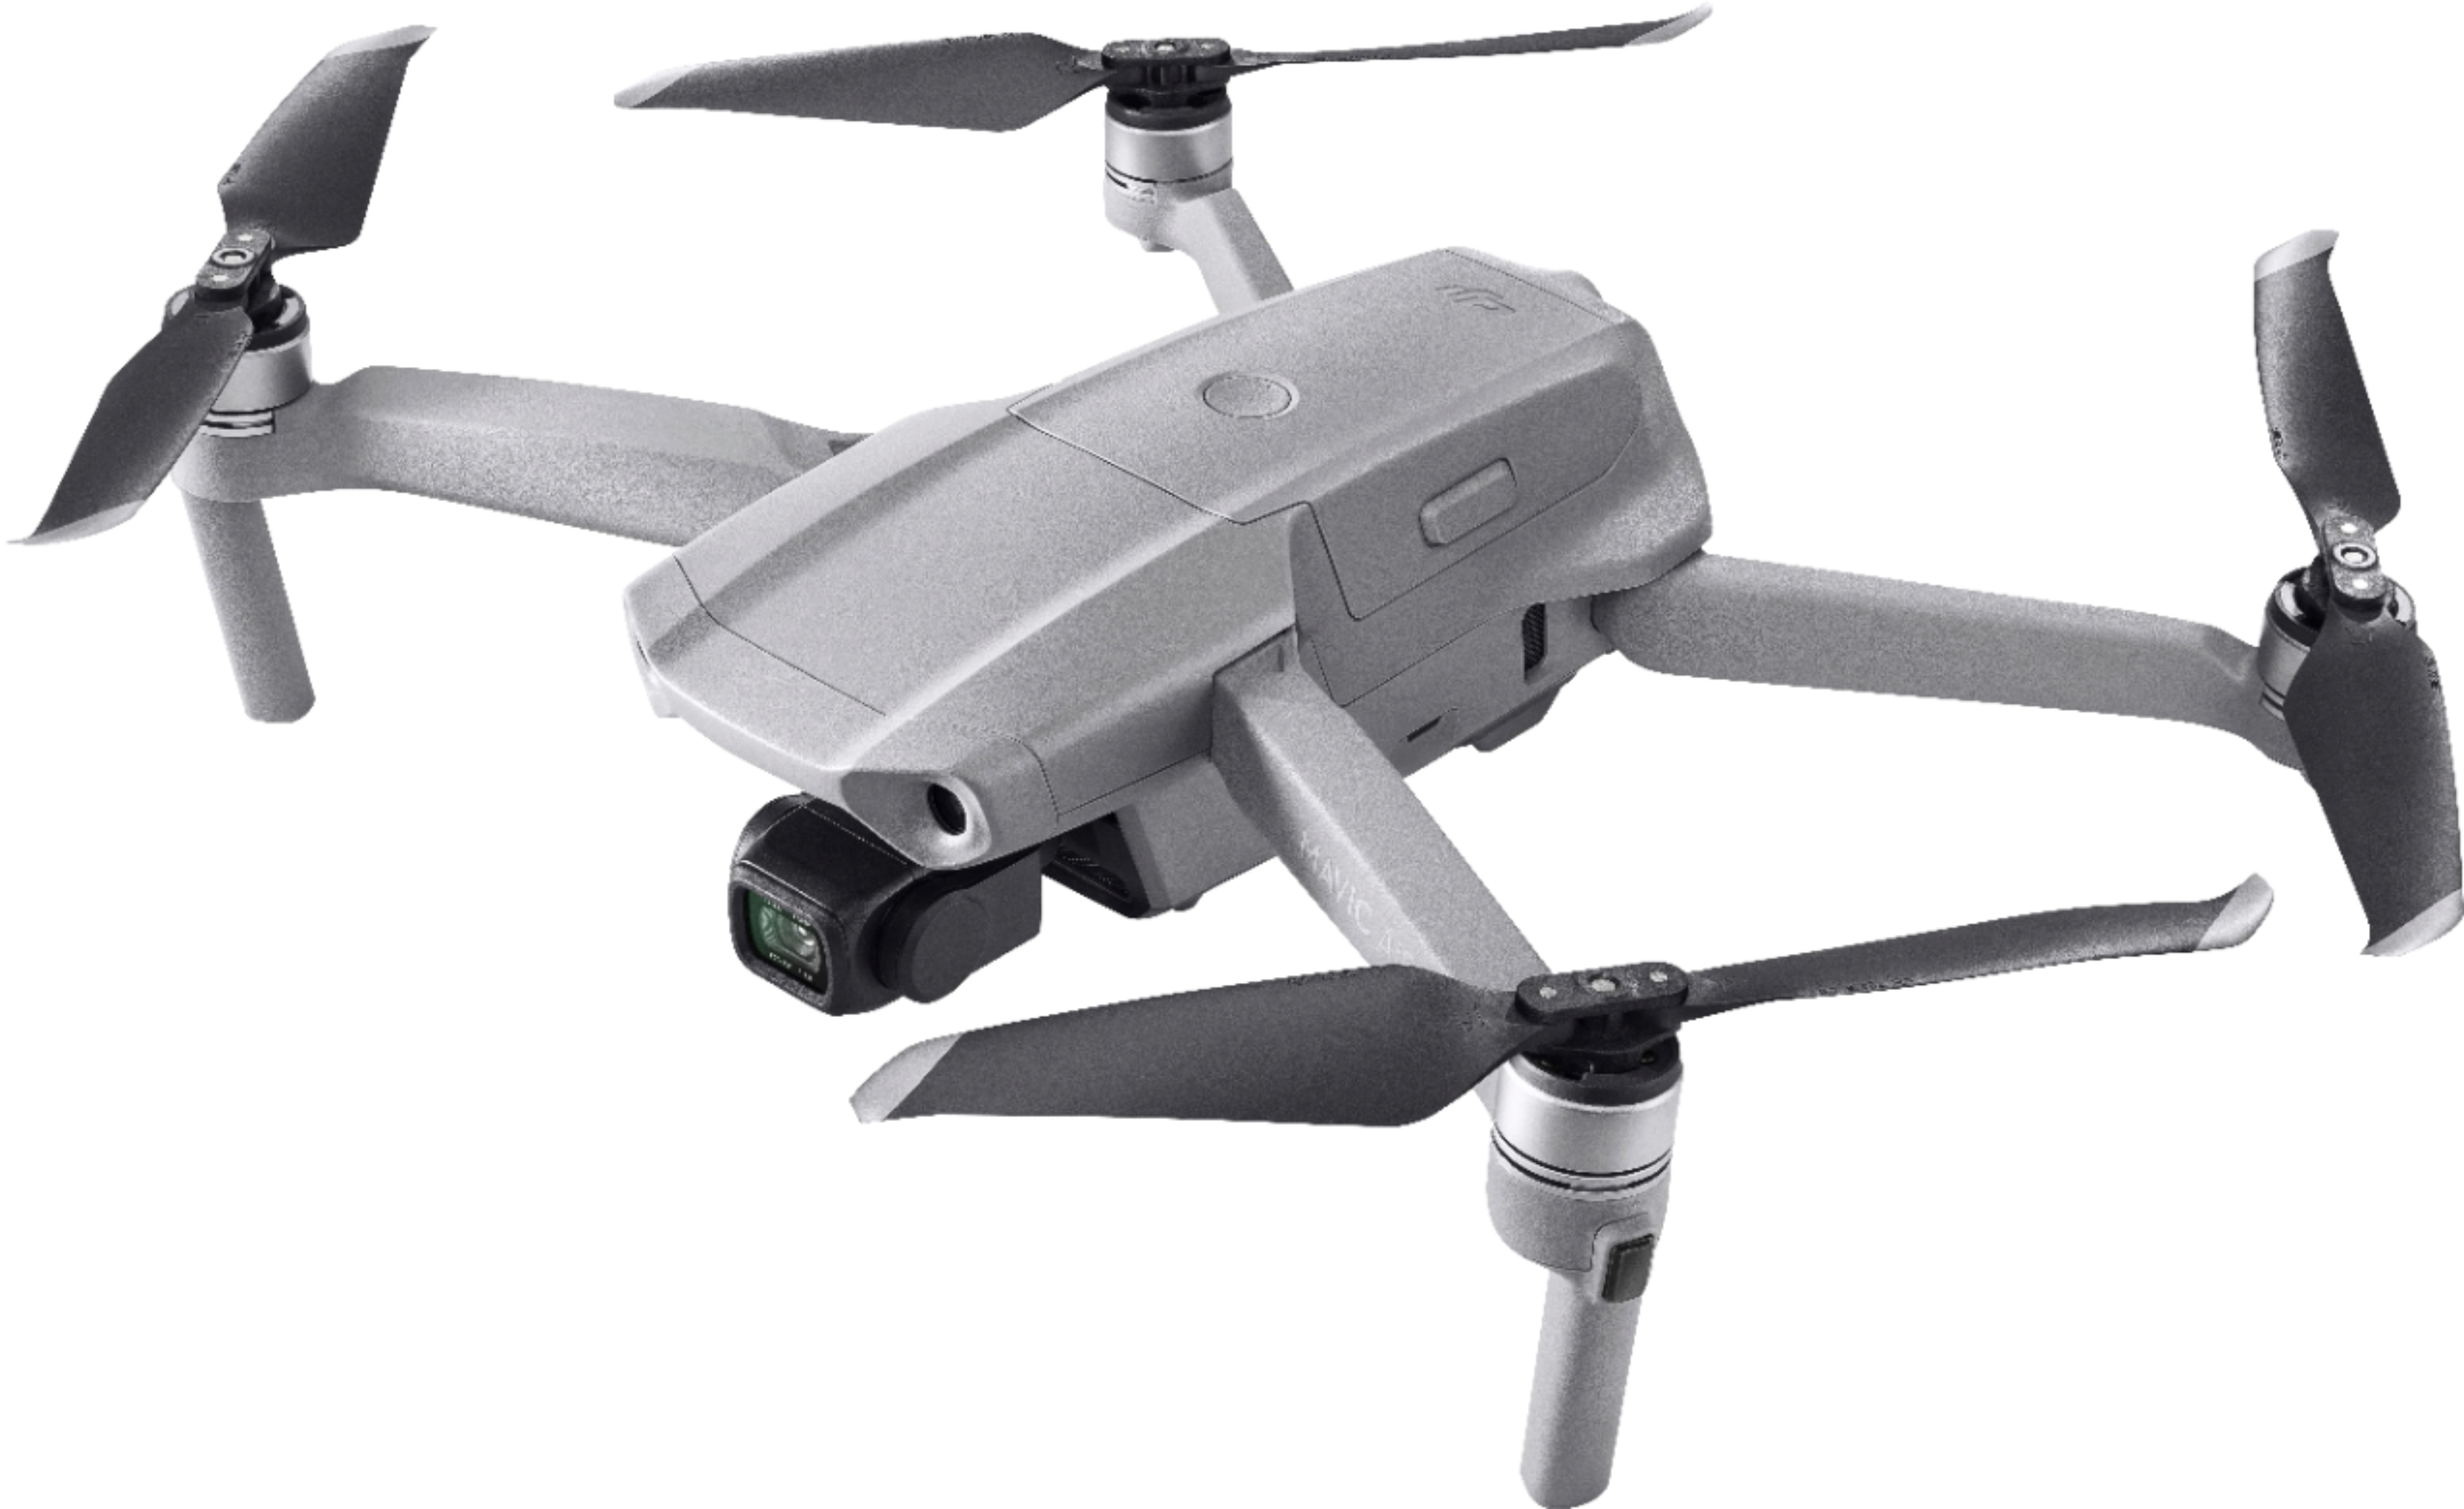 DJI Mavic Air 2 Quadcopter Drone Fly More Combo w/ Remote Controller $671.99 + Free Shipping